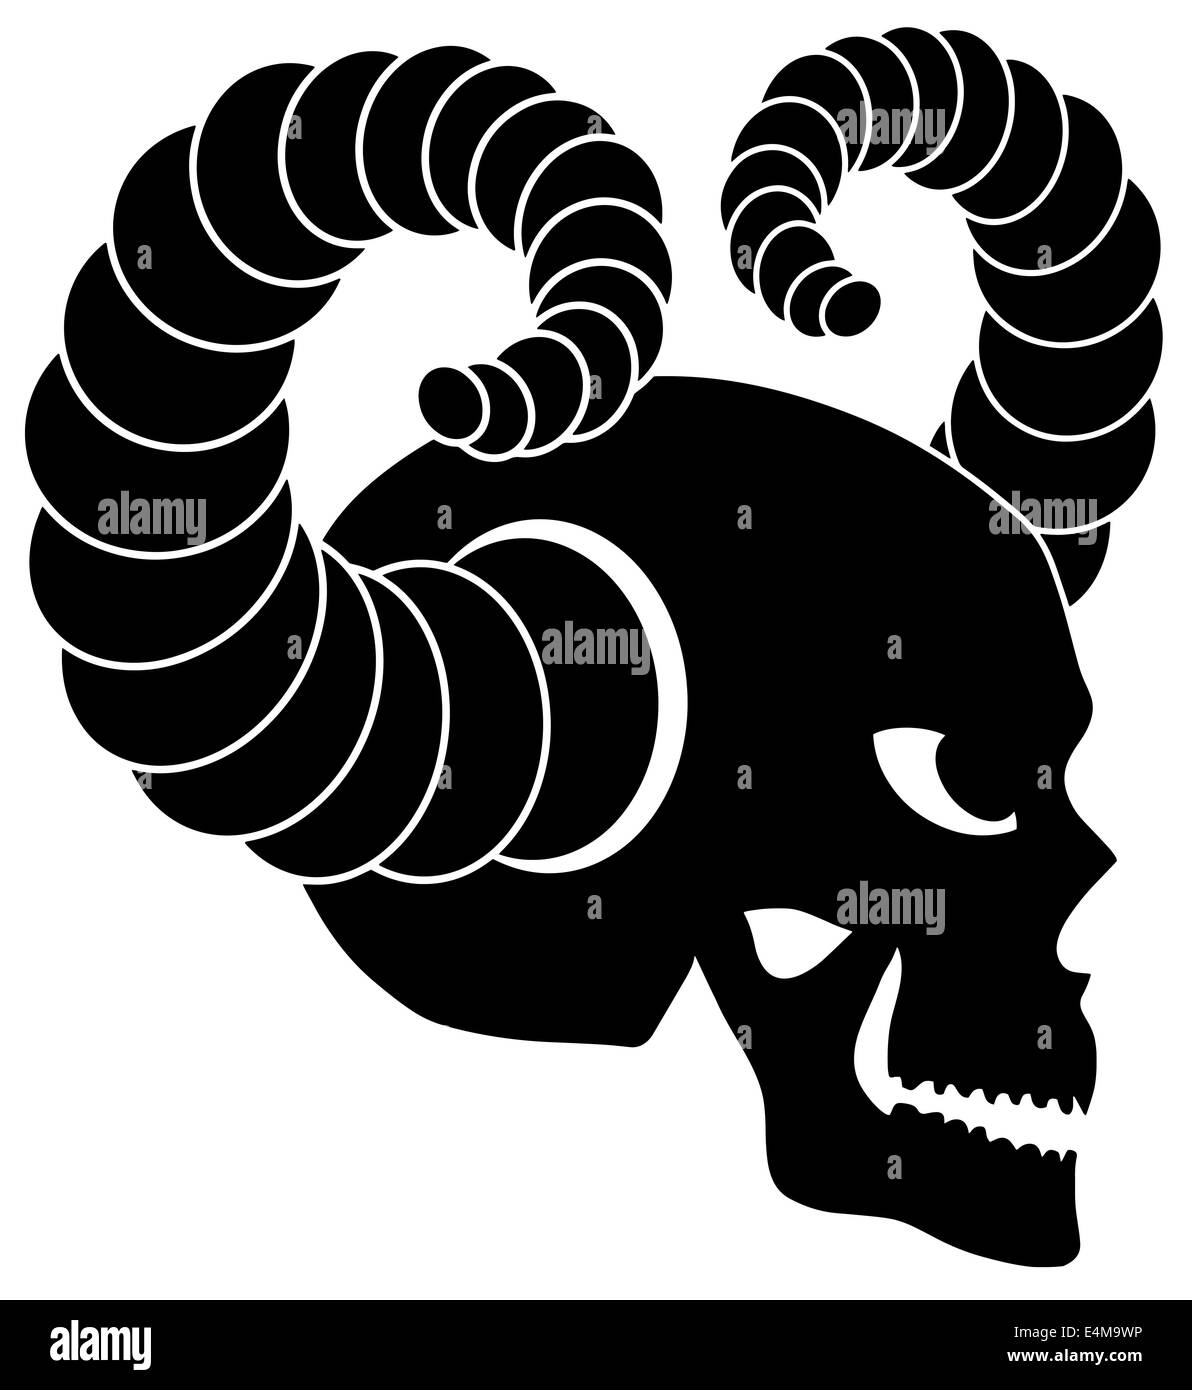 Skull with Horns Side View Black and White Illustration Isolated on White Background Stock Photo